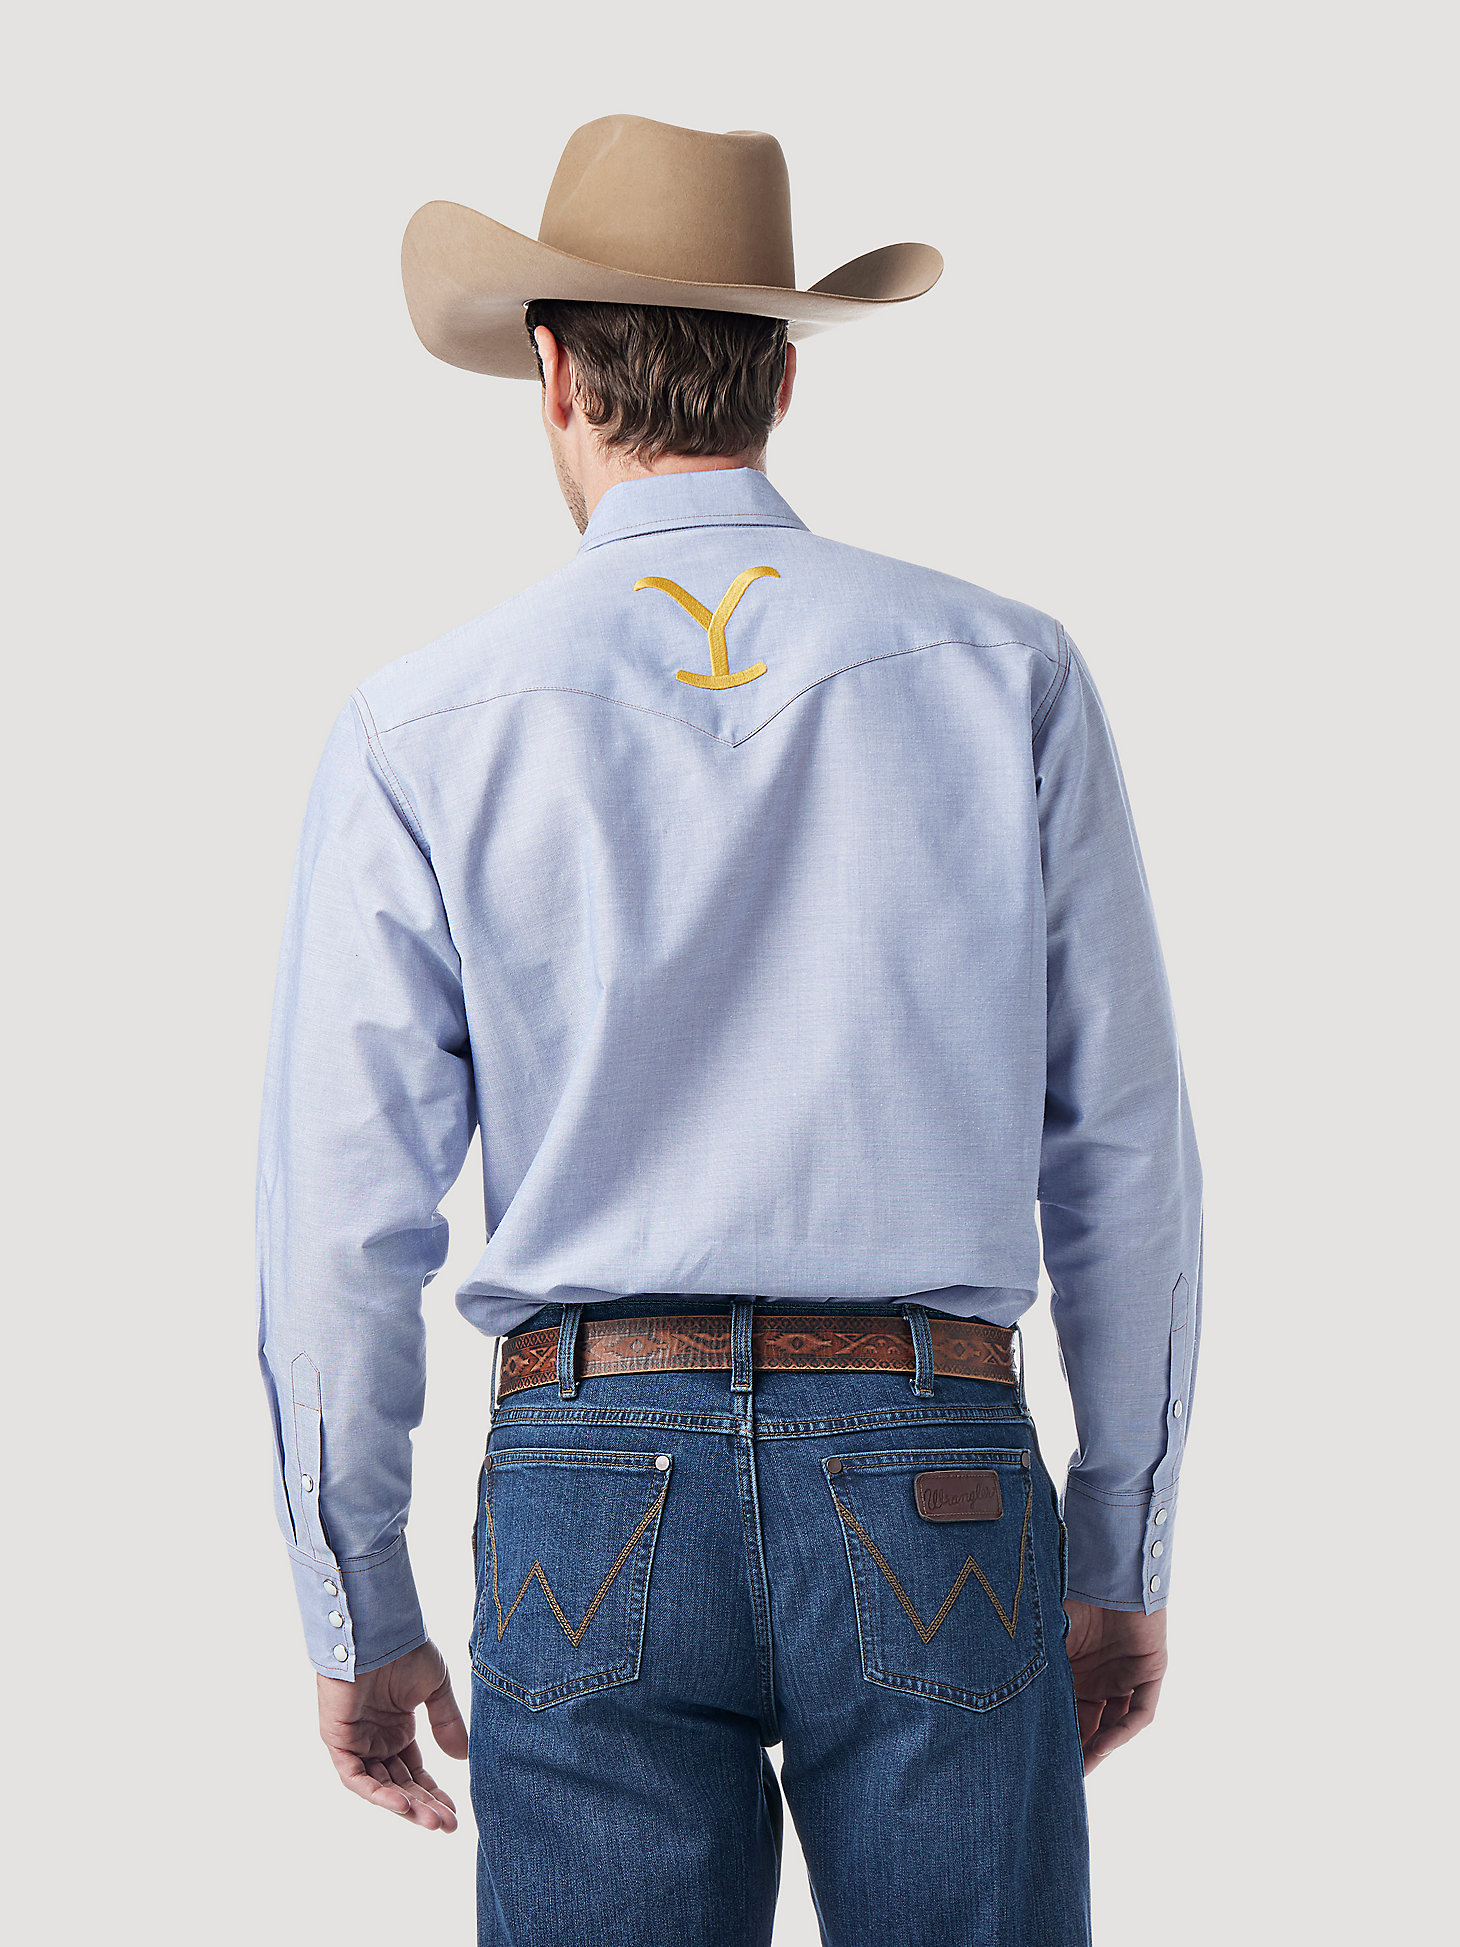 Wrangler x Yellowstone Collar Accent Chambray Snap Shirt in Chambray Blue alternative view 2